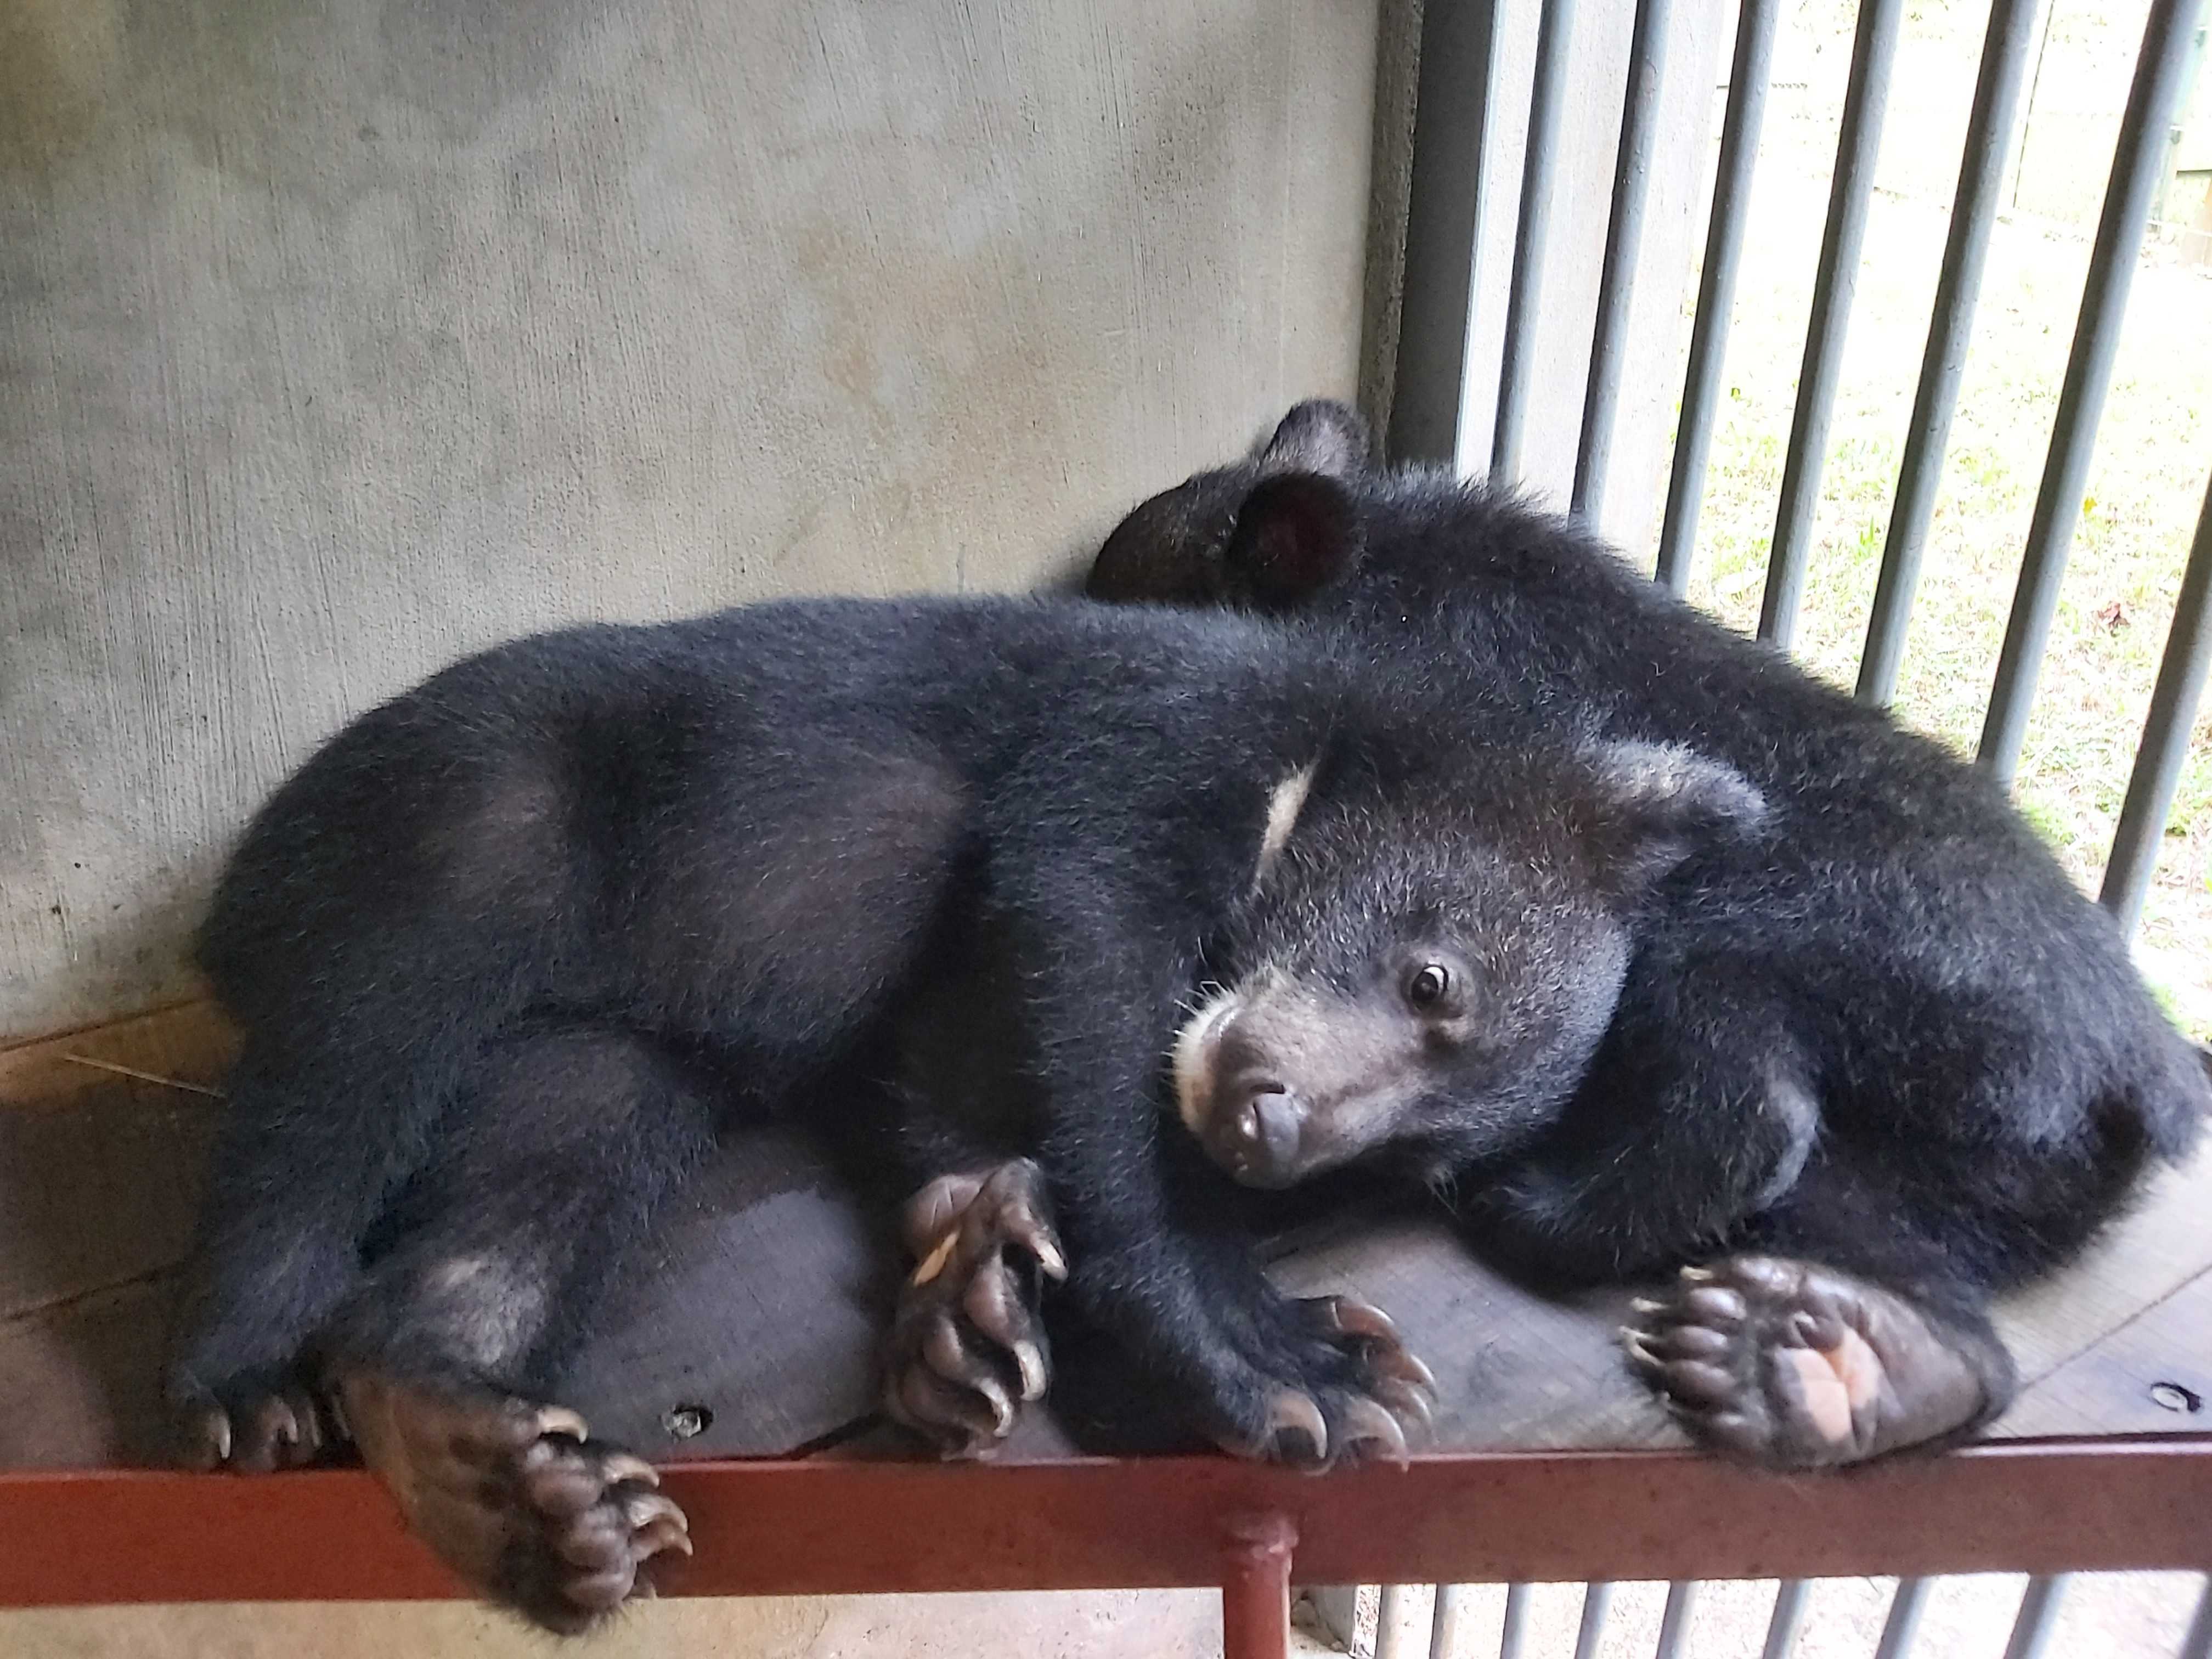 Double Trouble – bear cubs rescued in Vietnam